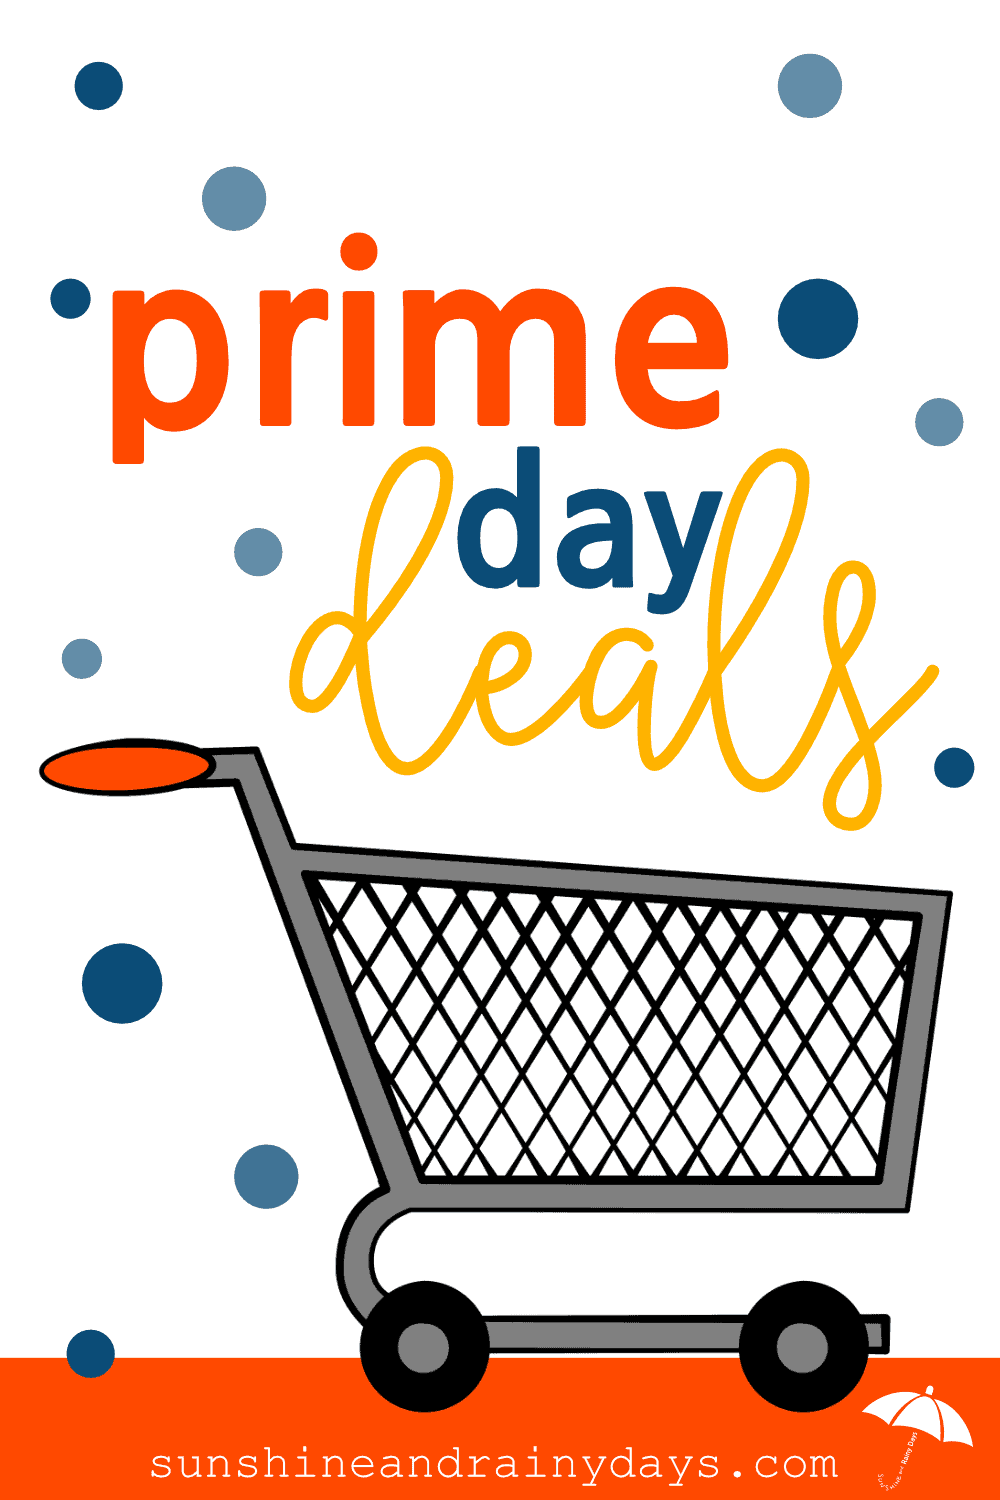 Shopping Deals of the Day - Happy Deal Happy Day!